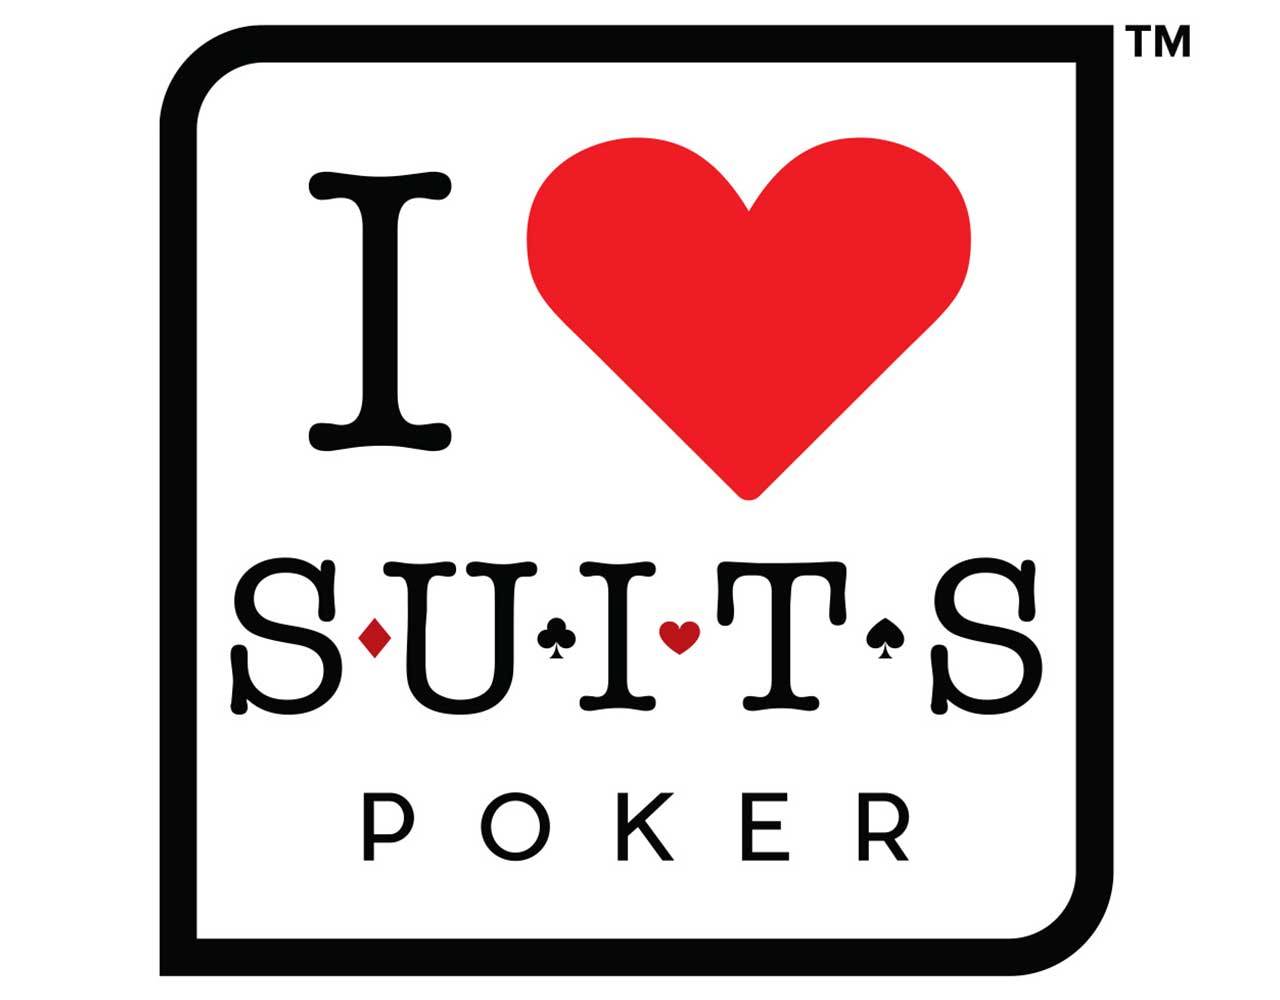 I Luv Suits Poker